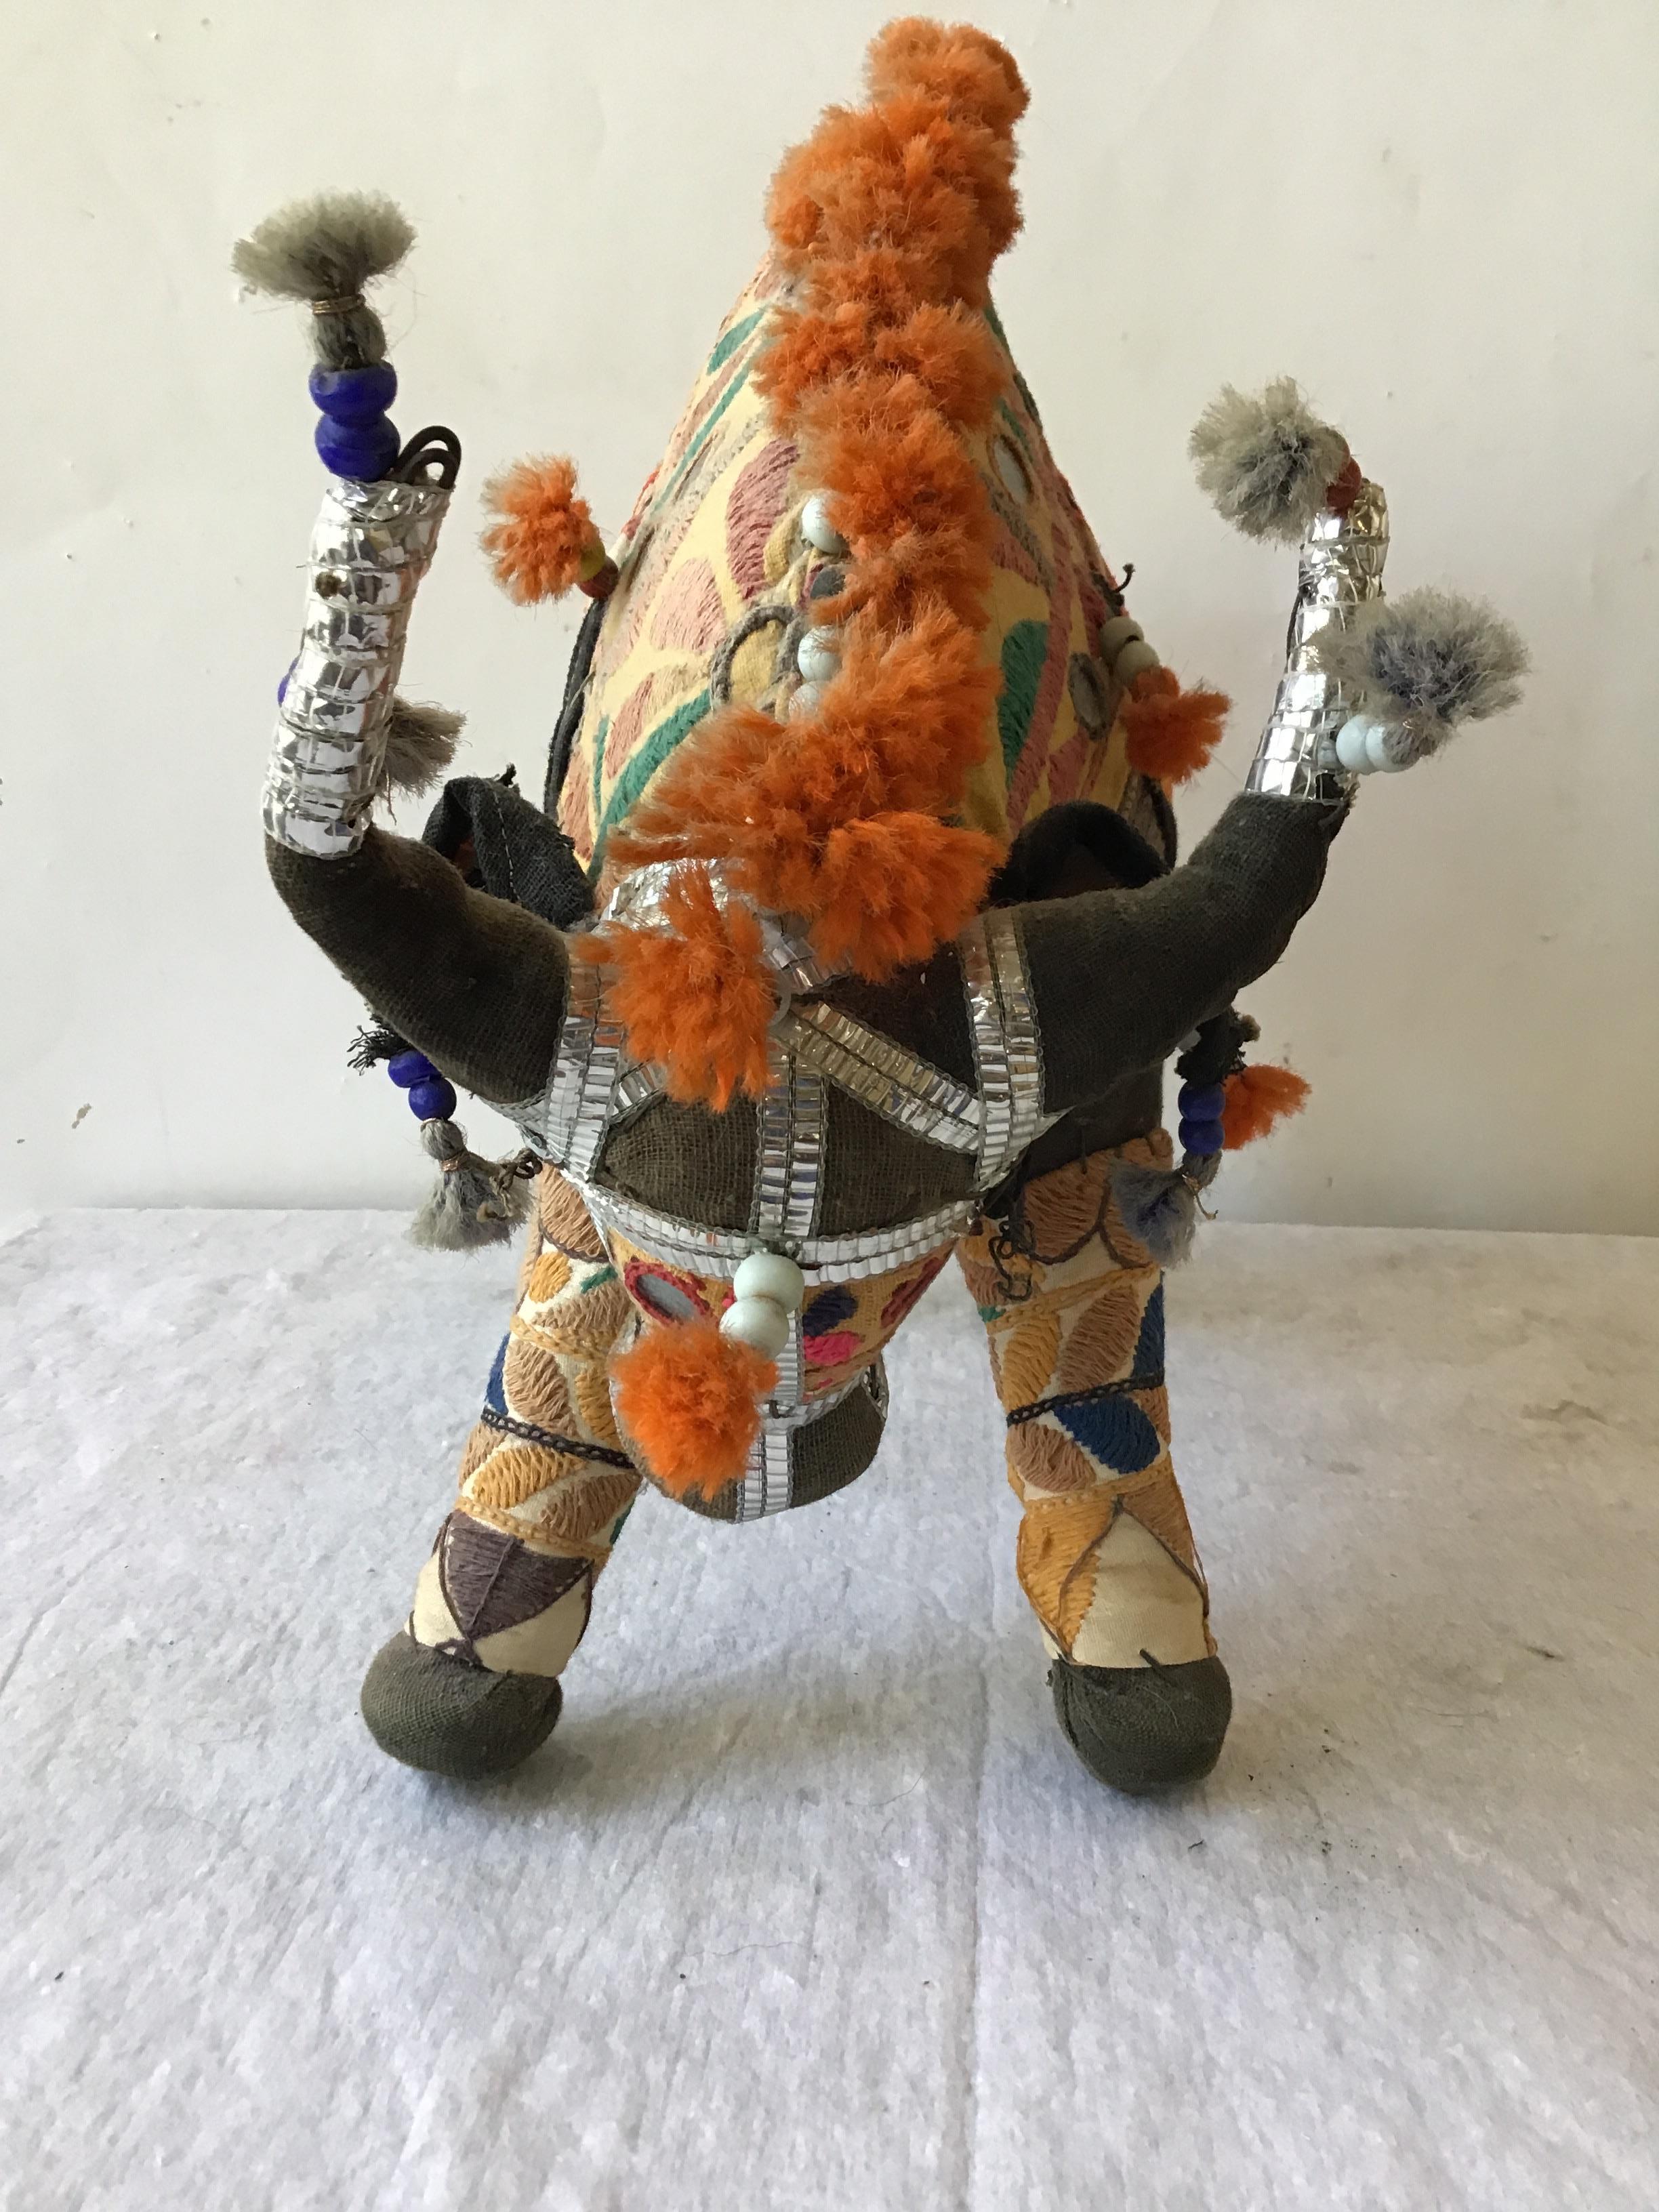 1960s handmade stuffed bull toy from India. Fabric embroidered and decorated with mirrors and beads.